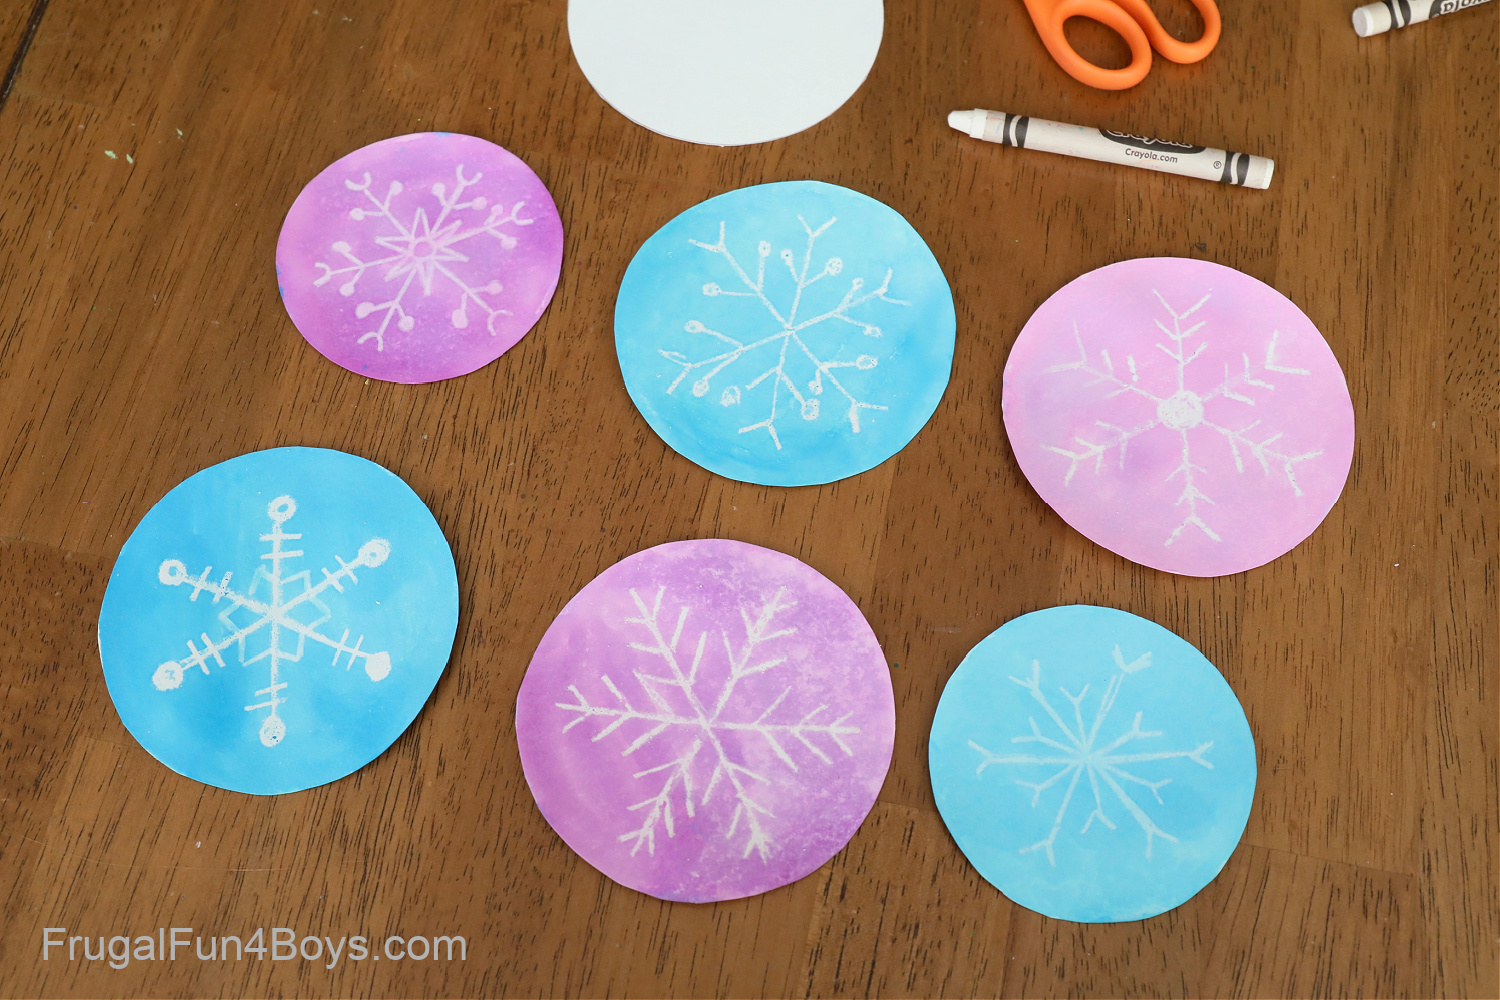 Watercolor and white crayon snowflakes